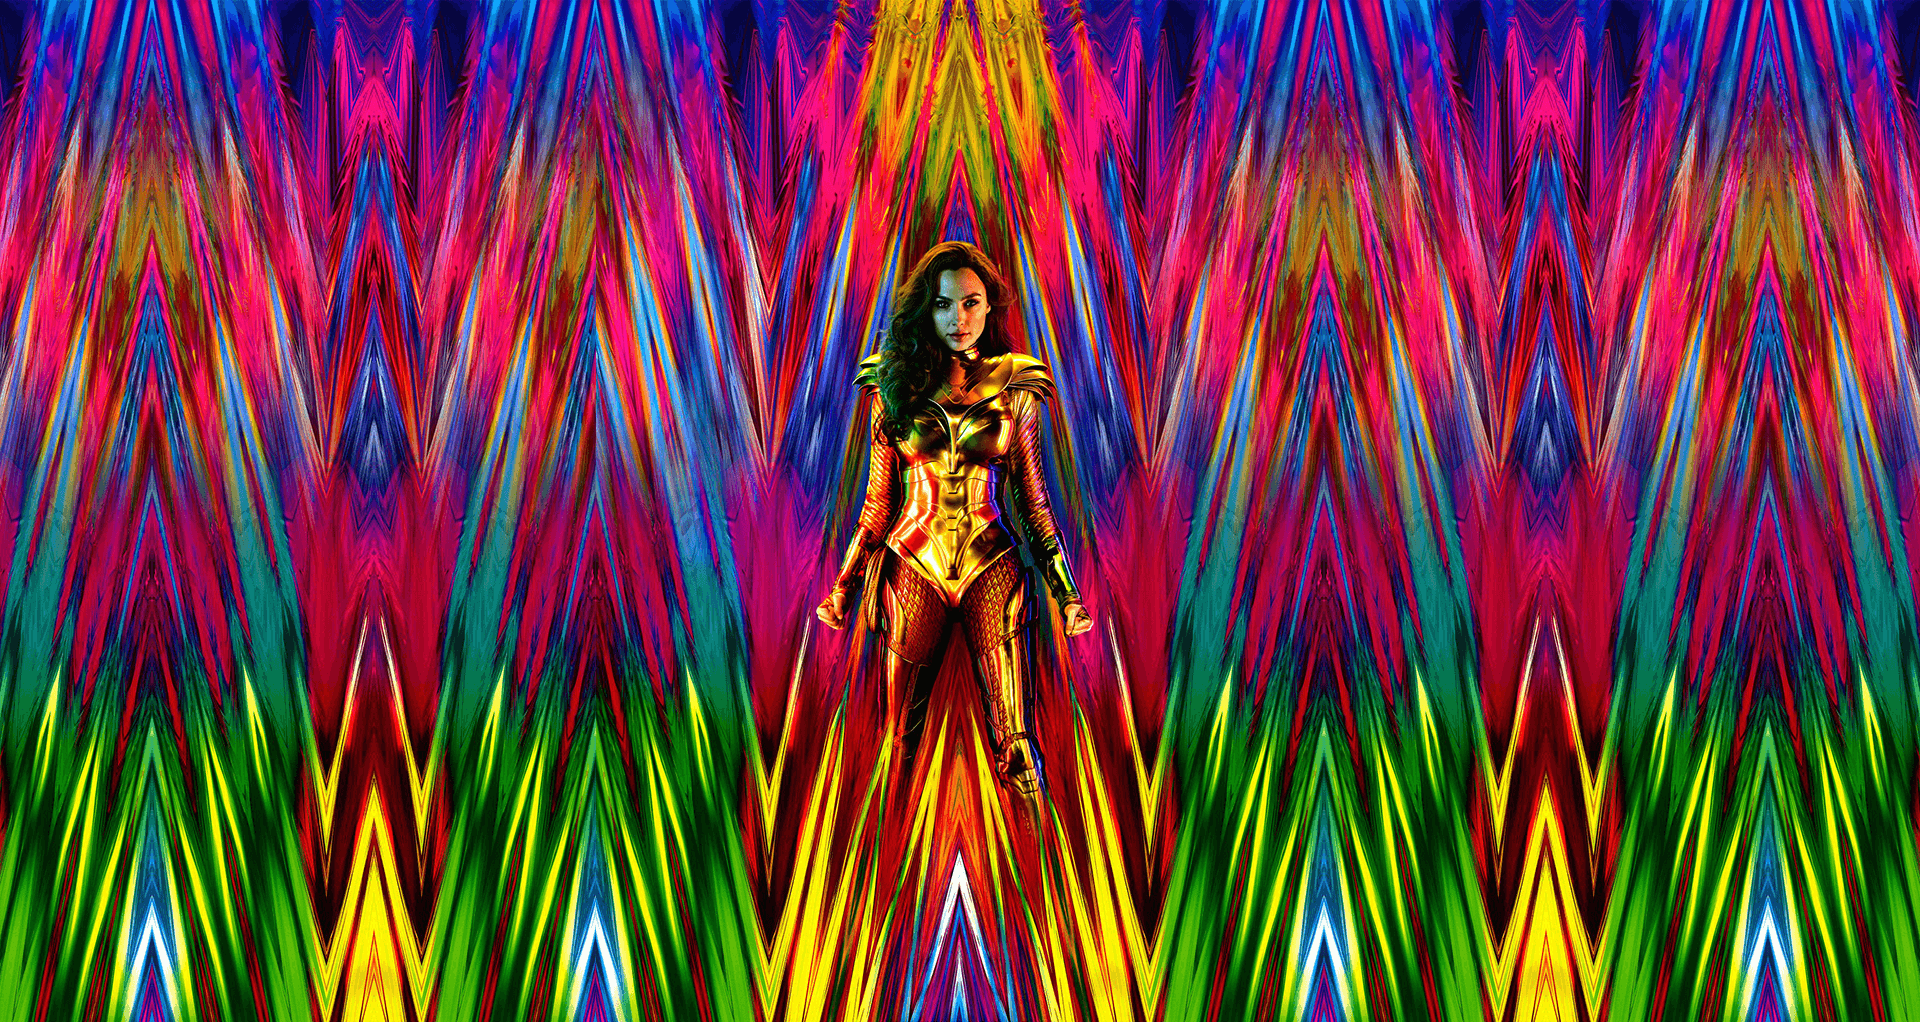 Made a Desktop Version of the recently released Wonder Woman